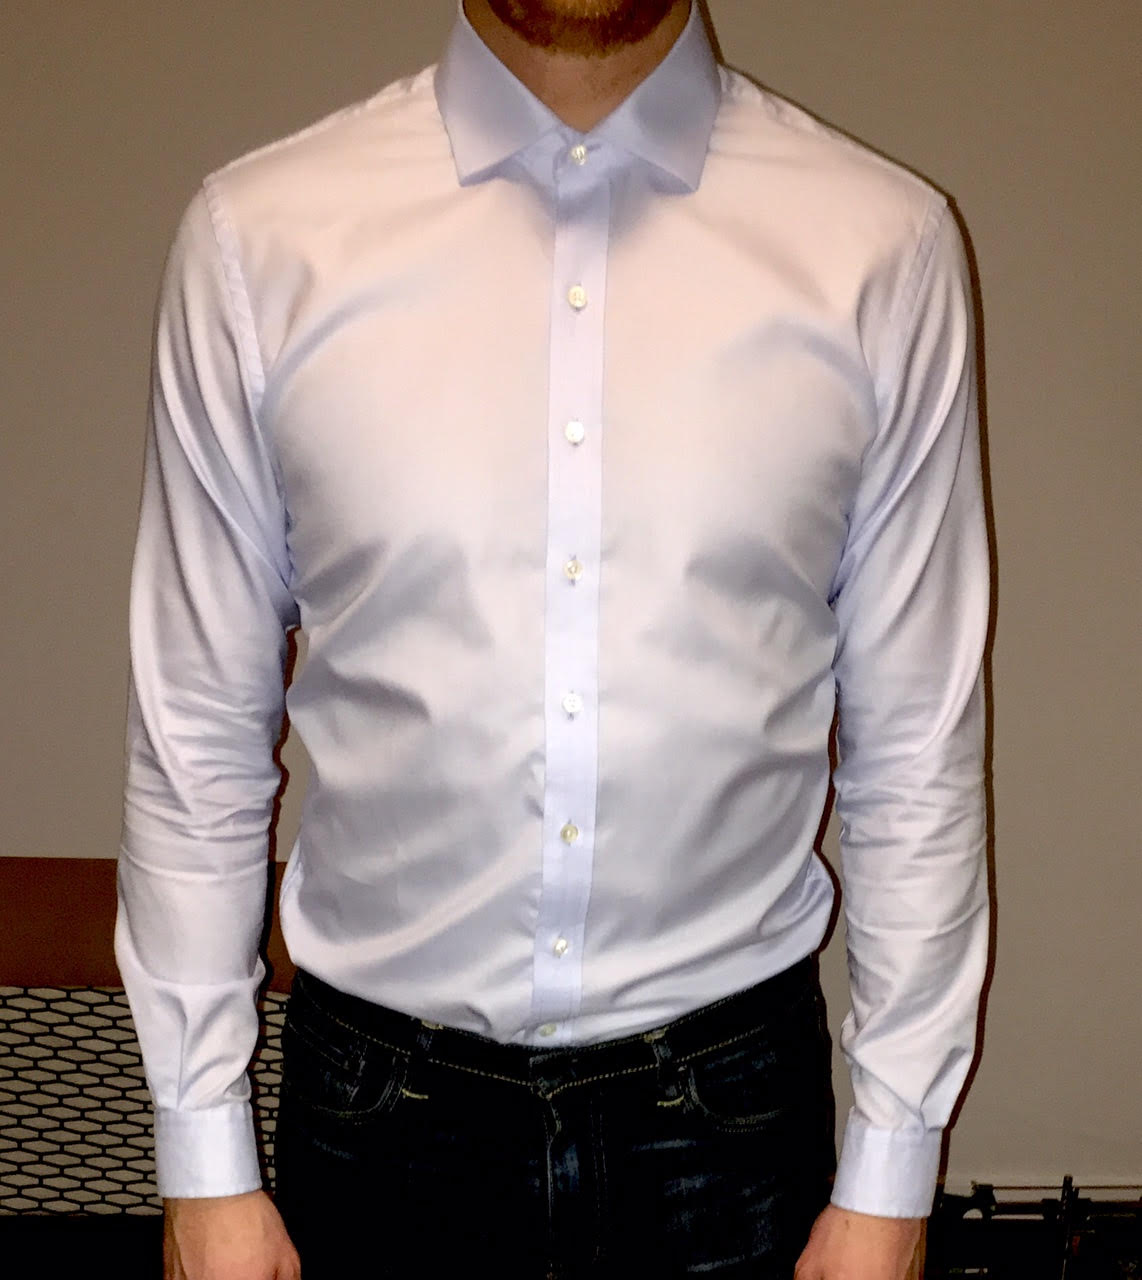 SHIRT FITTING ISSUE: Diagonal lines on upper arm. | Styleforum